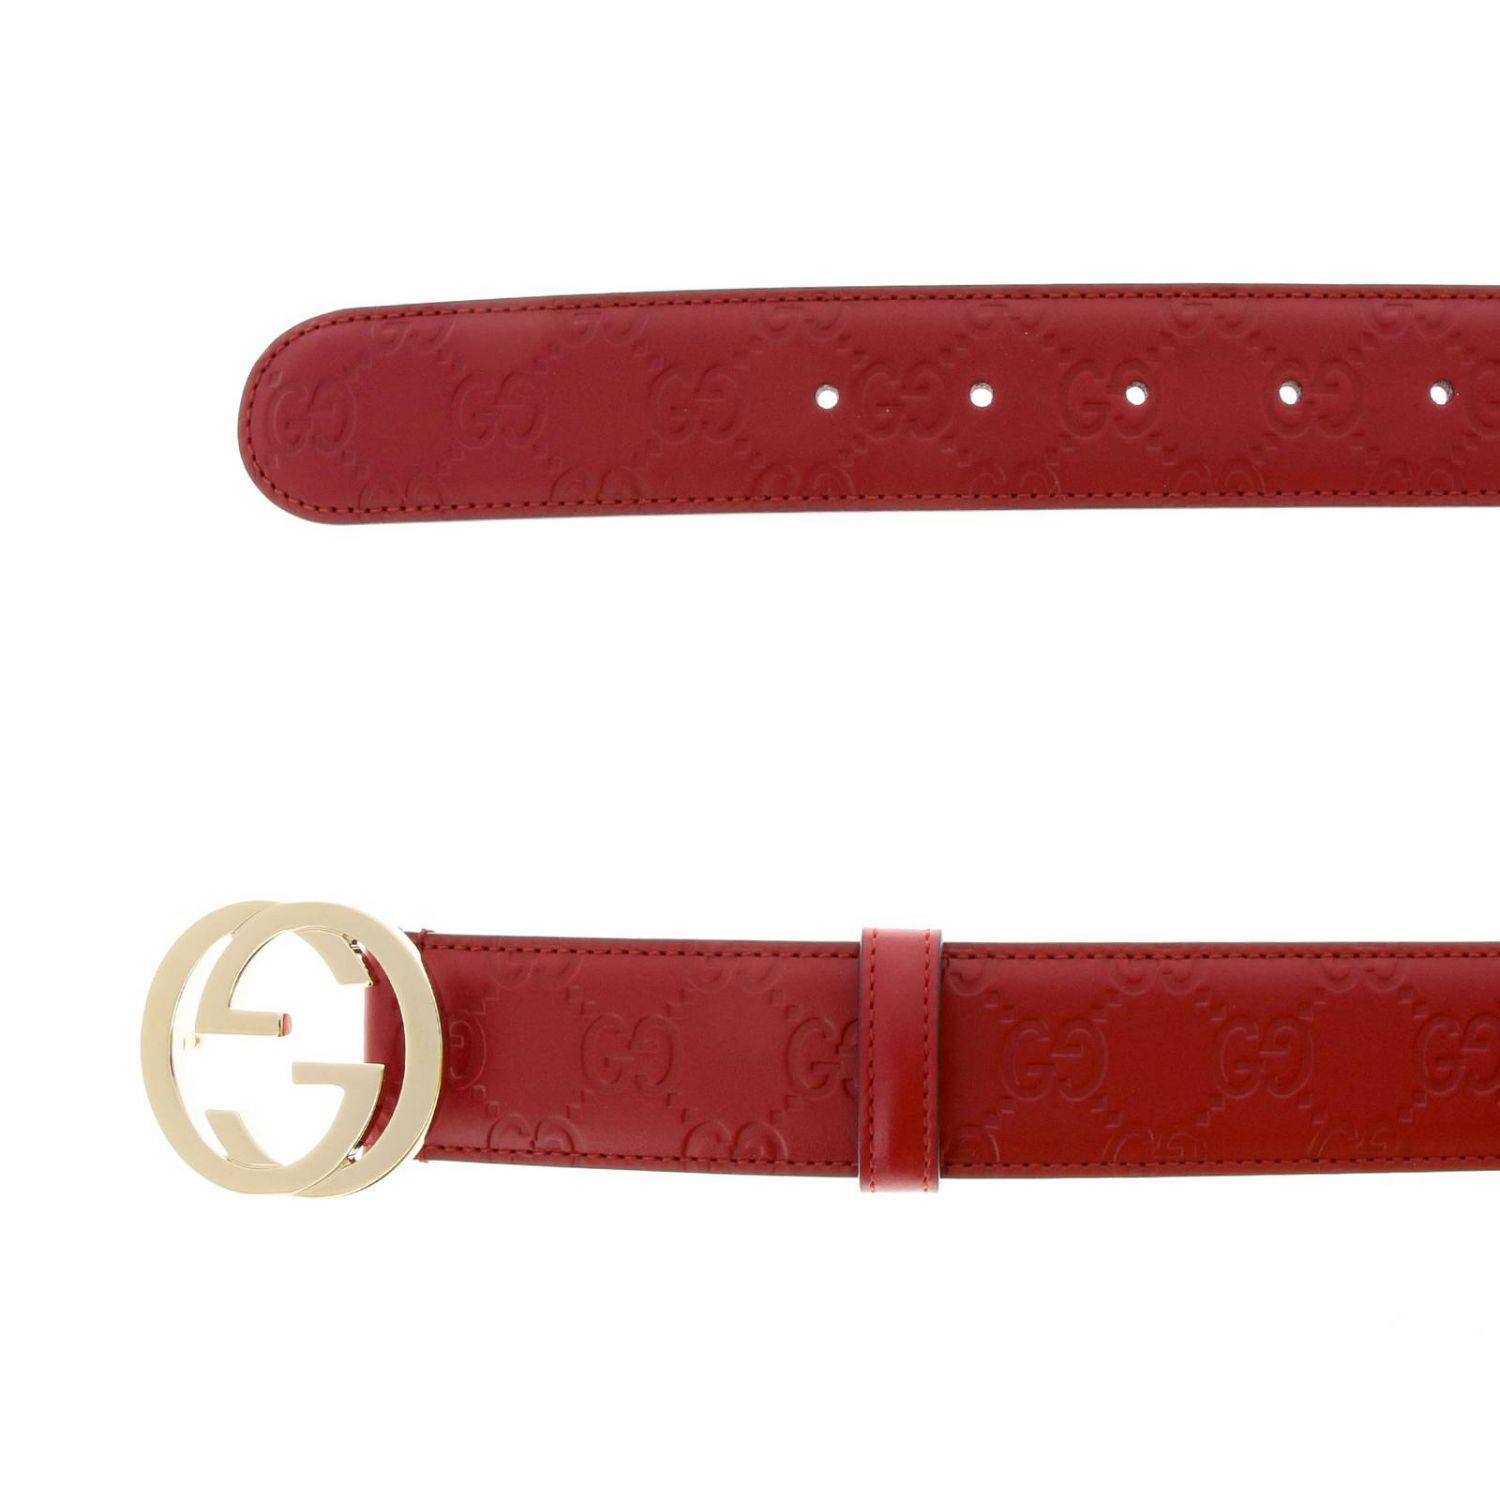 Gg buckle leather belt Gucci Red size 70 cm in Leather - 20589733